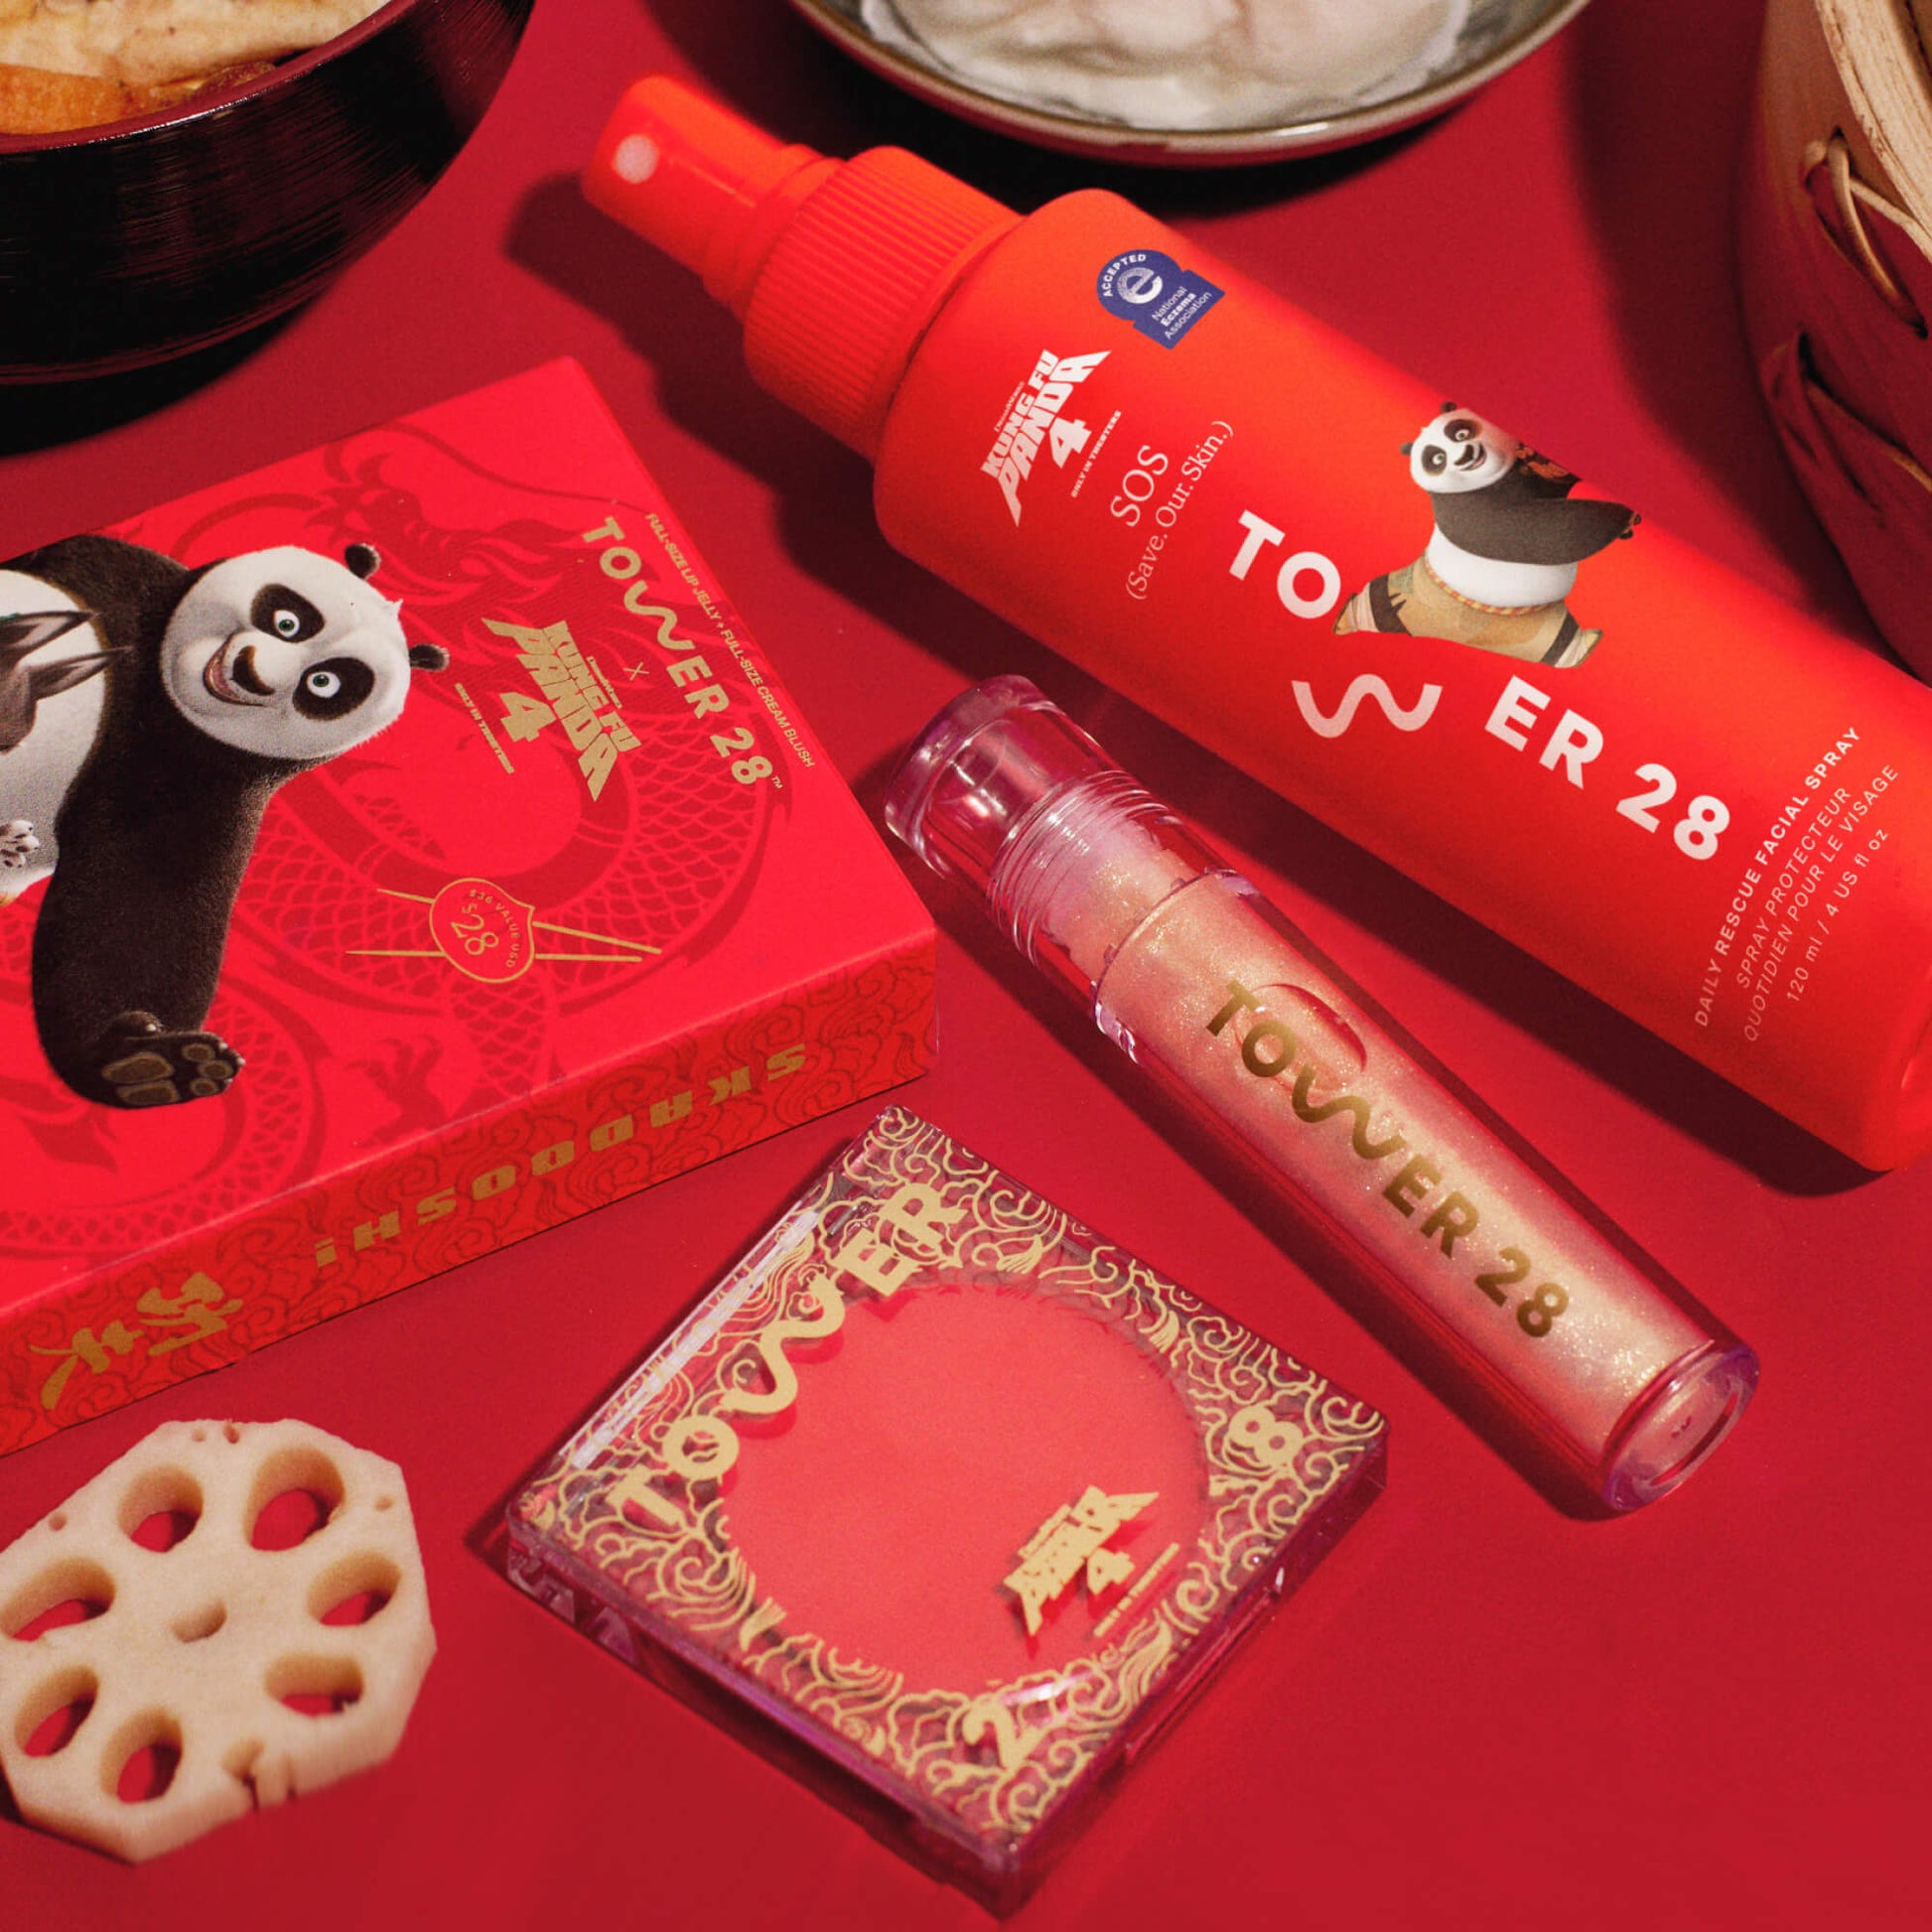 Shared: Table flat lay of Tower 28 Beauty x Kung Fu Panda 4 limited edition collaboration collection: Lip + Cheek Duo and SOS Daily Rescue Facial Spray. The Lip + Cheek Duo features one full size ShineOn Lip Jelly in Magic and one full size BeachPlease Cream Blush in Dumpling Hour.